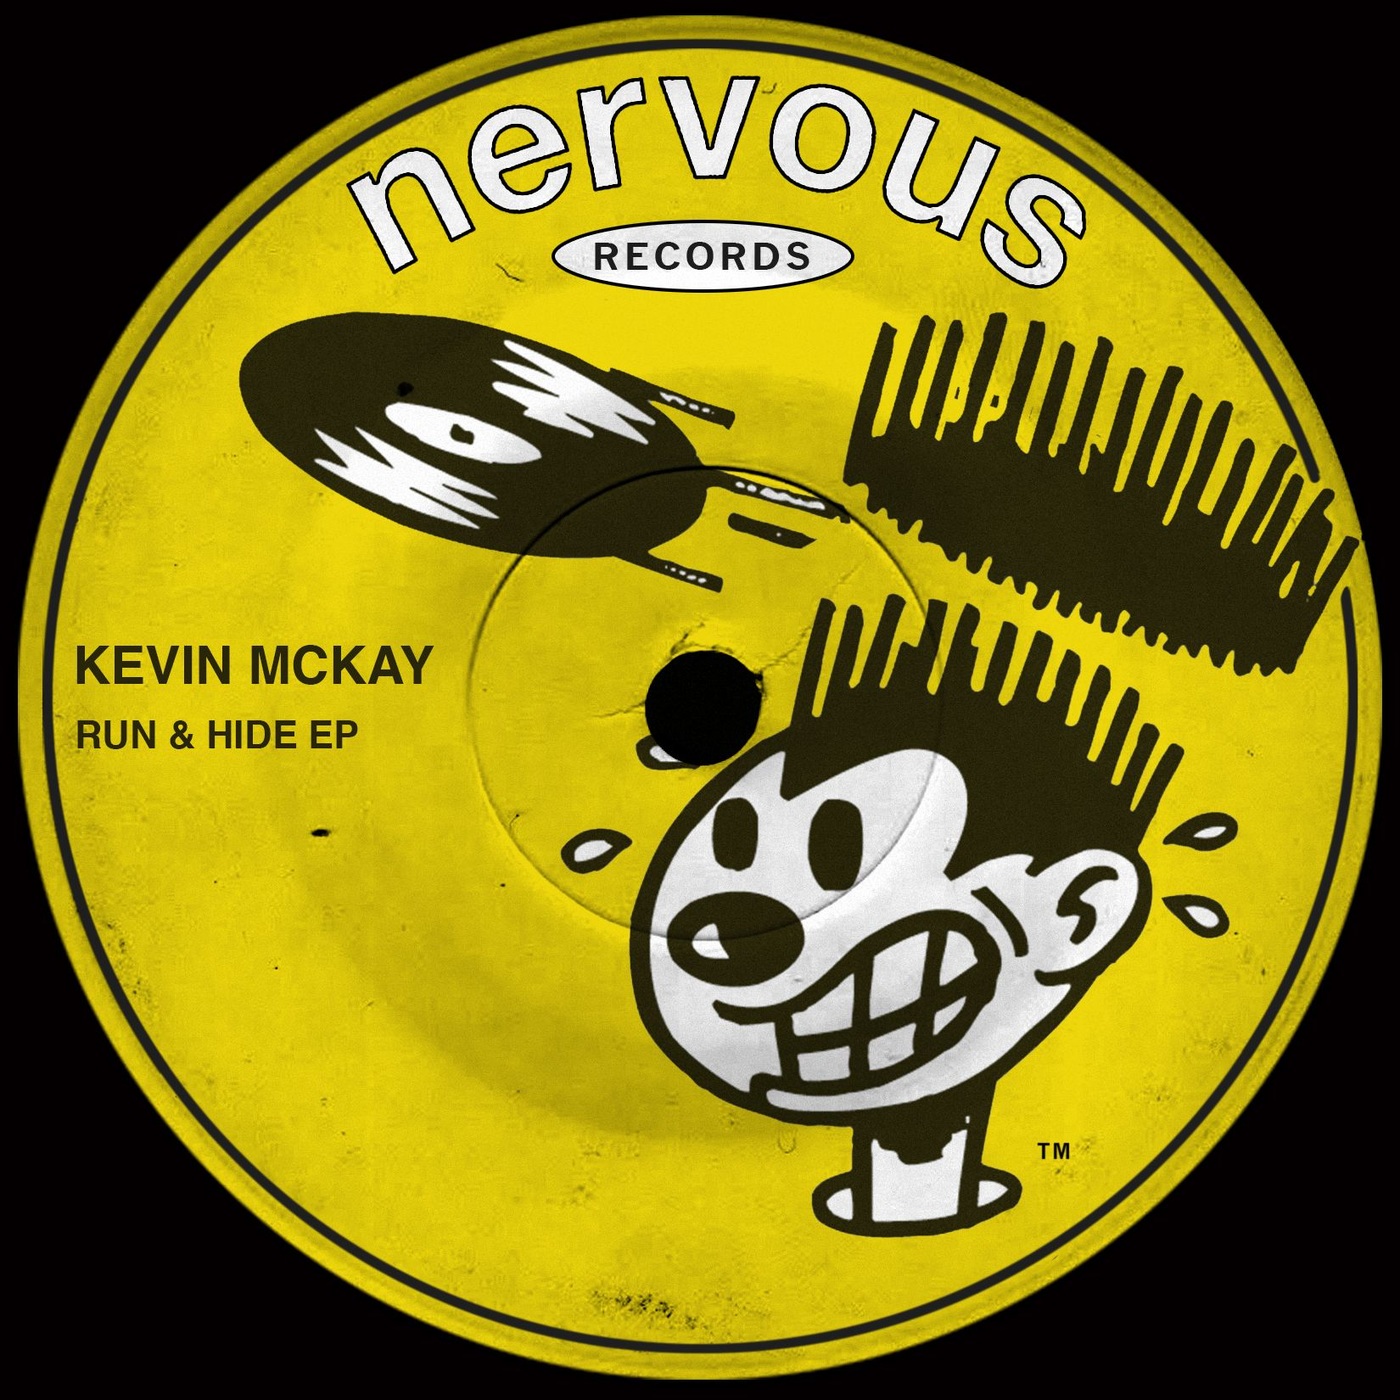 Kevin McKay - Run & Hide EP / Nervous Records